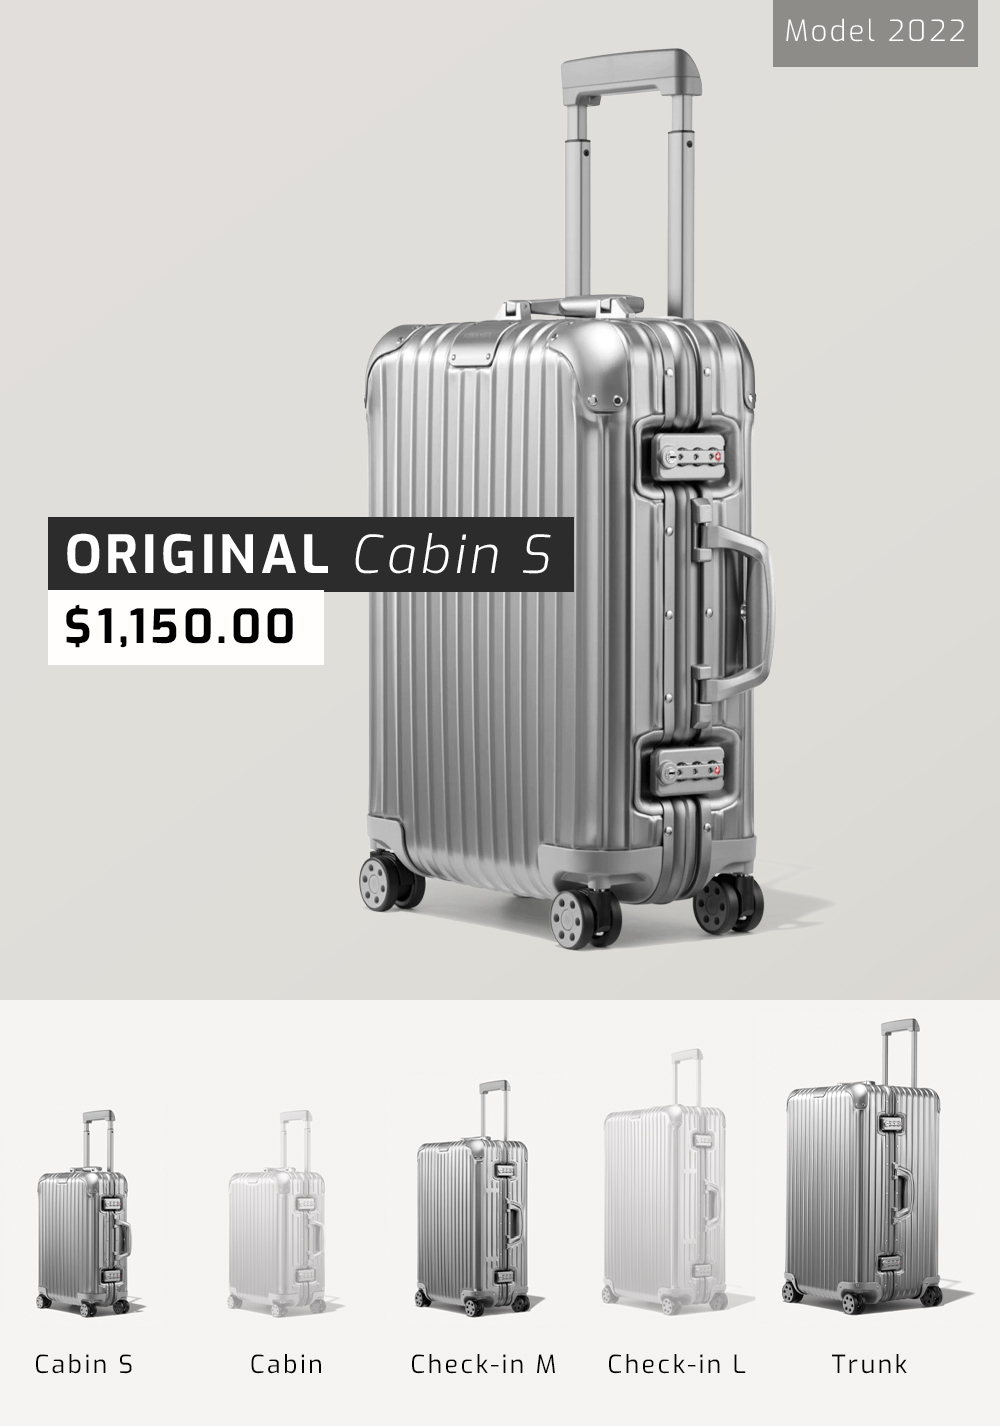 Rimowa: A return to its engineering roots with iconic Classic Cabin